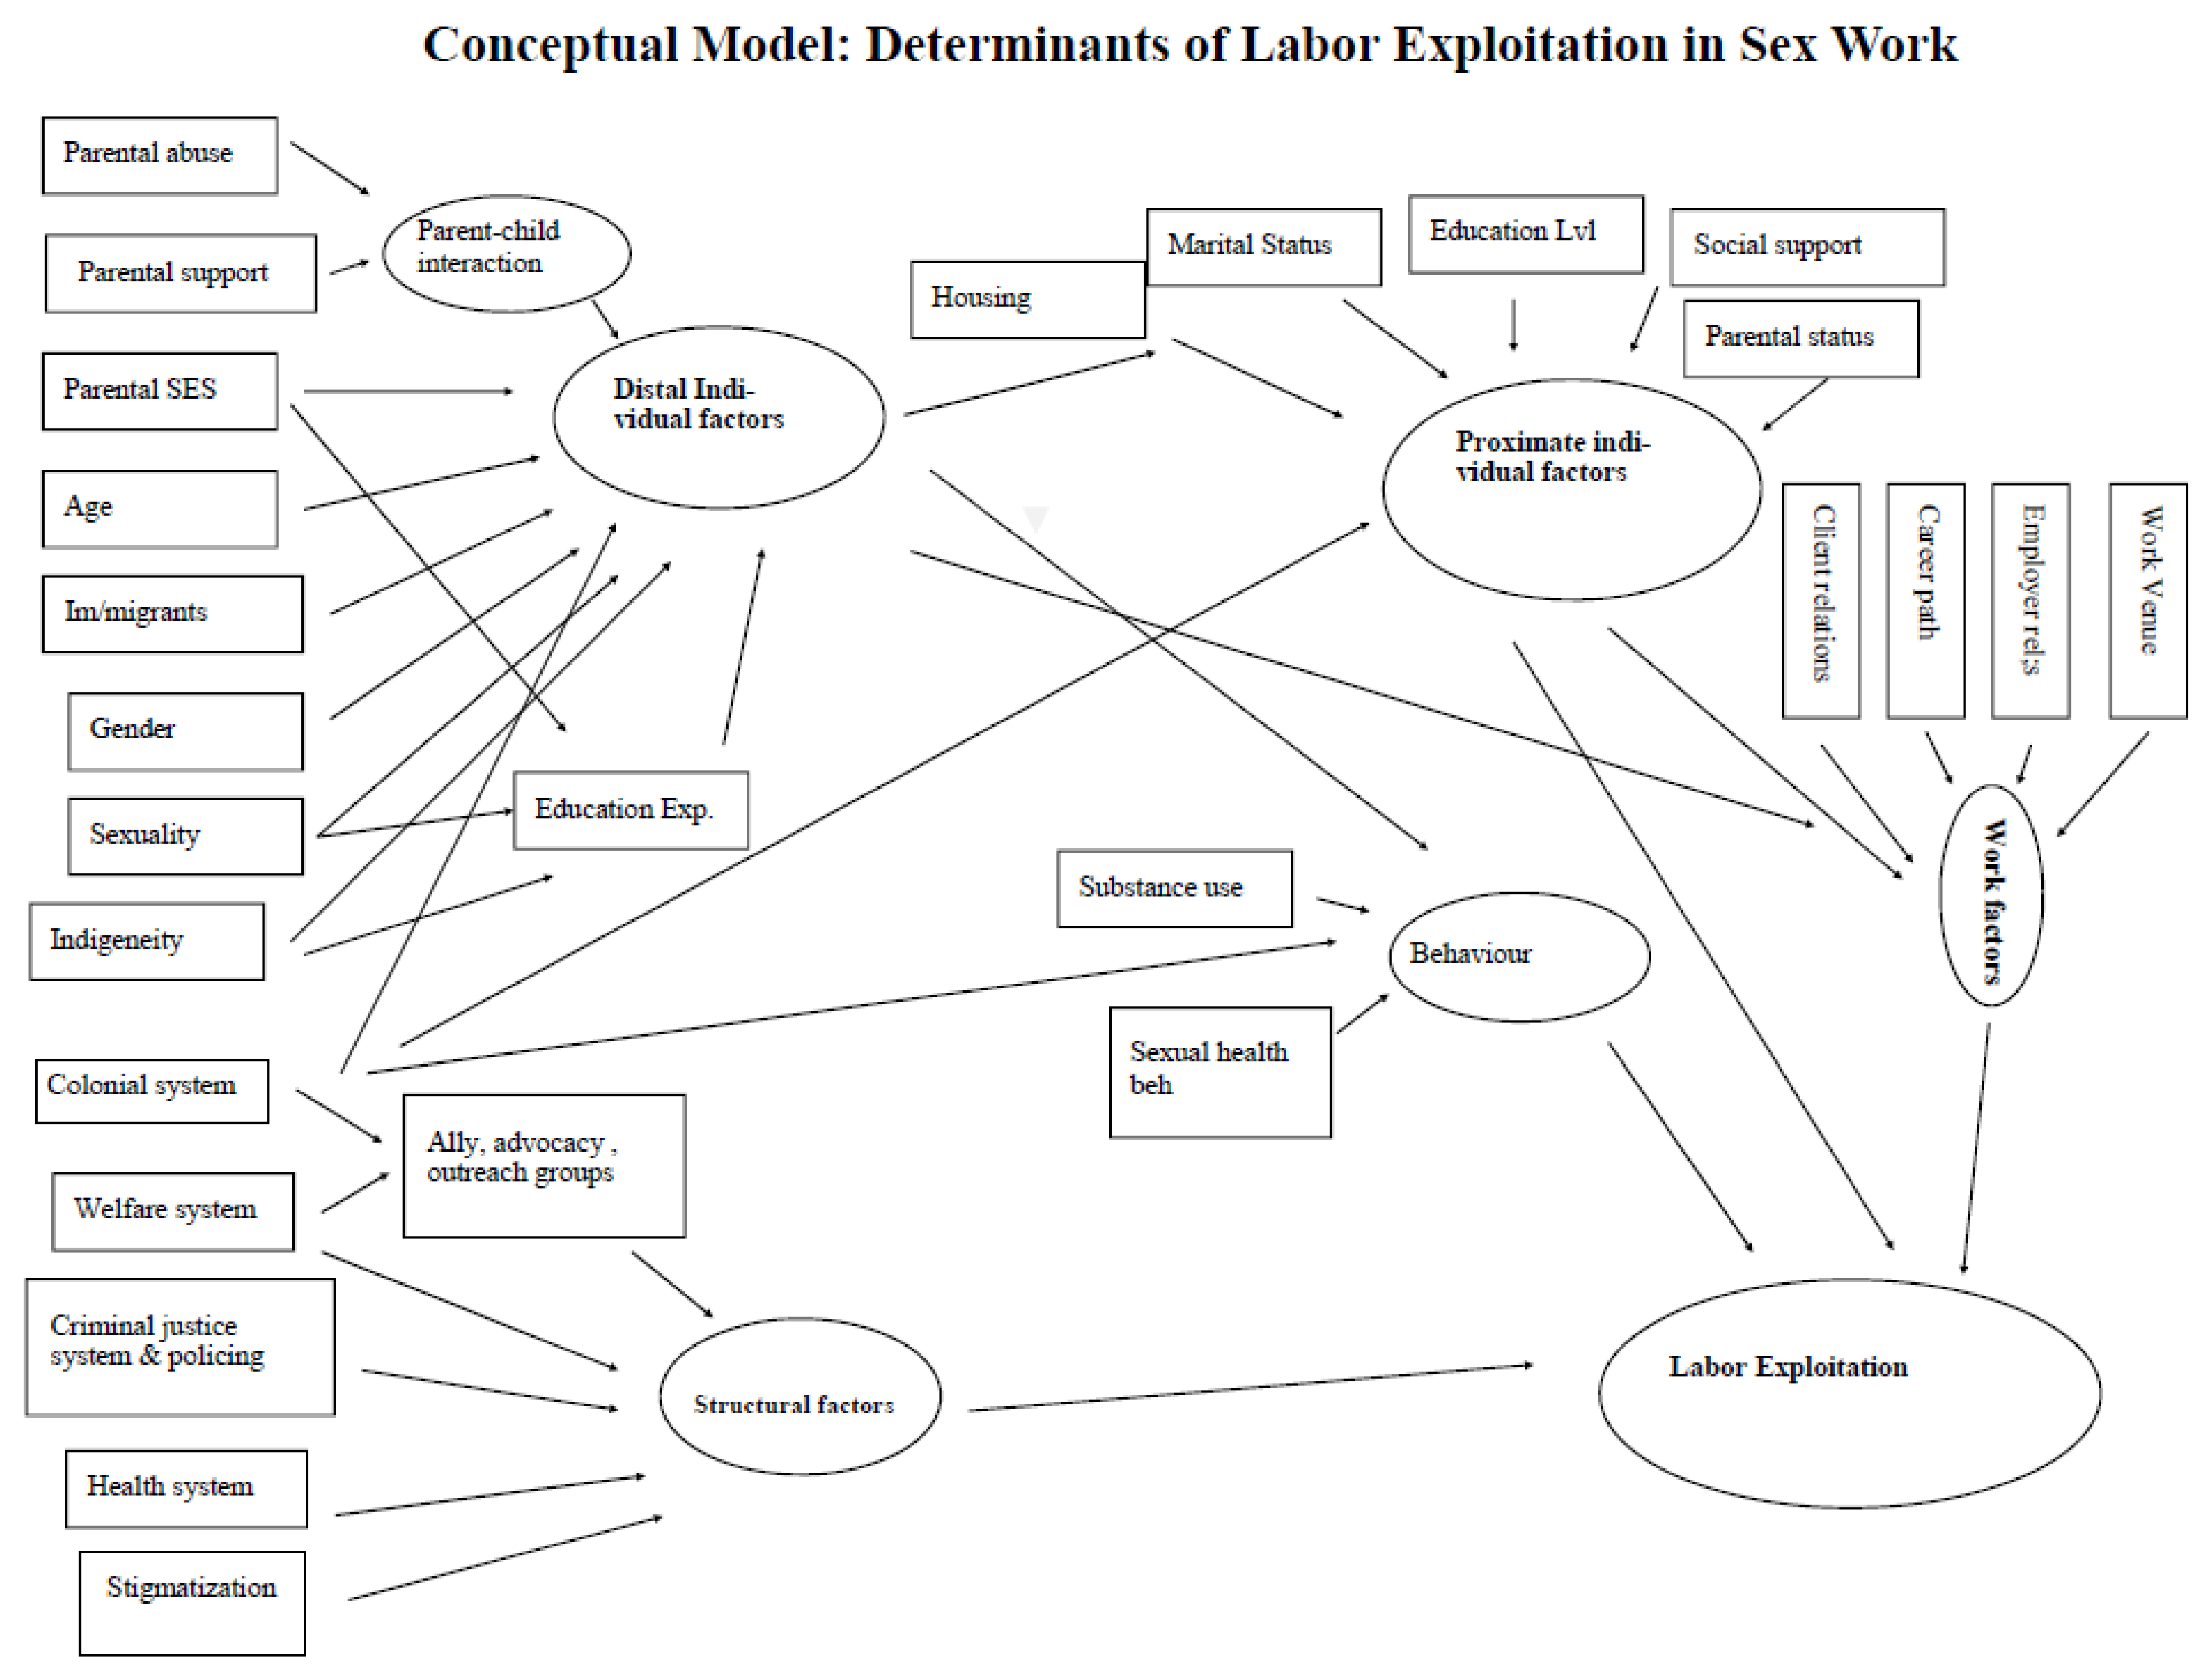 Social Sciences Free Full-Text Editorial Understanding Exploitation in Consensual Sex Work to Inform Occupational Health andamp; Safety Regulation Current Issues and Policy Implications image